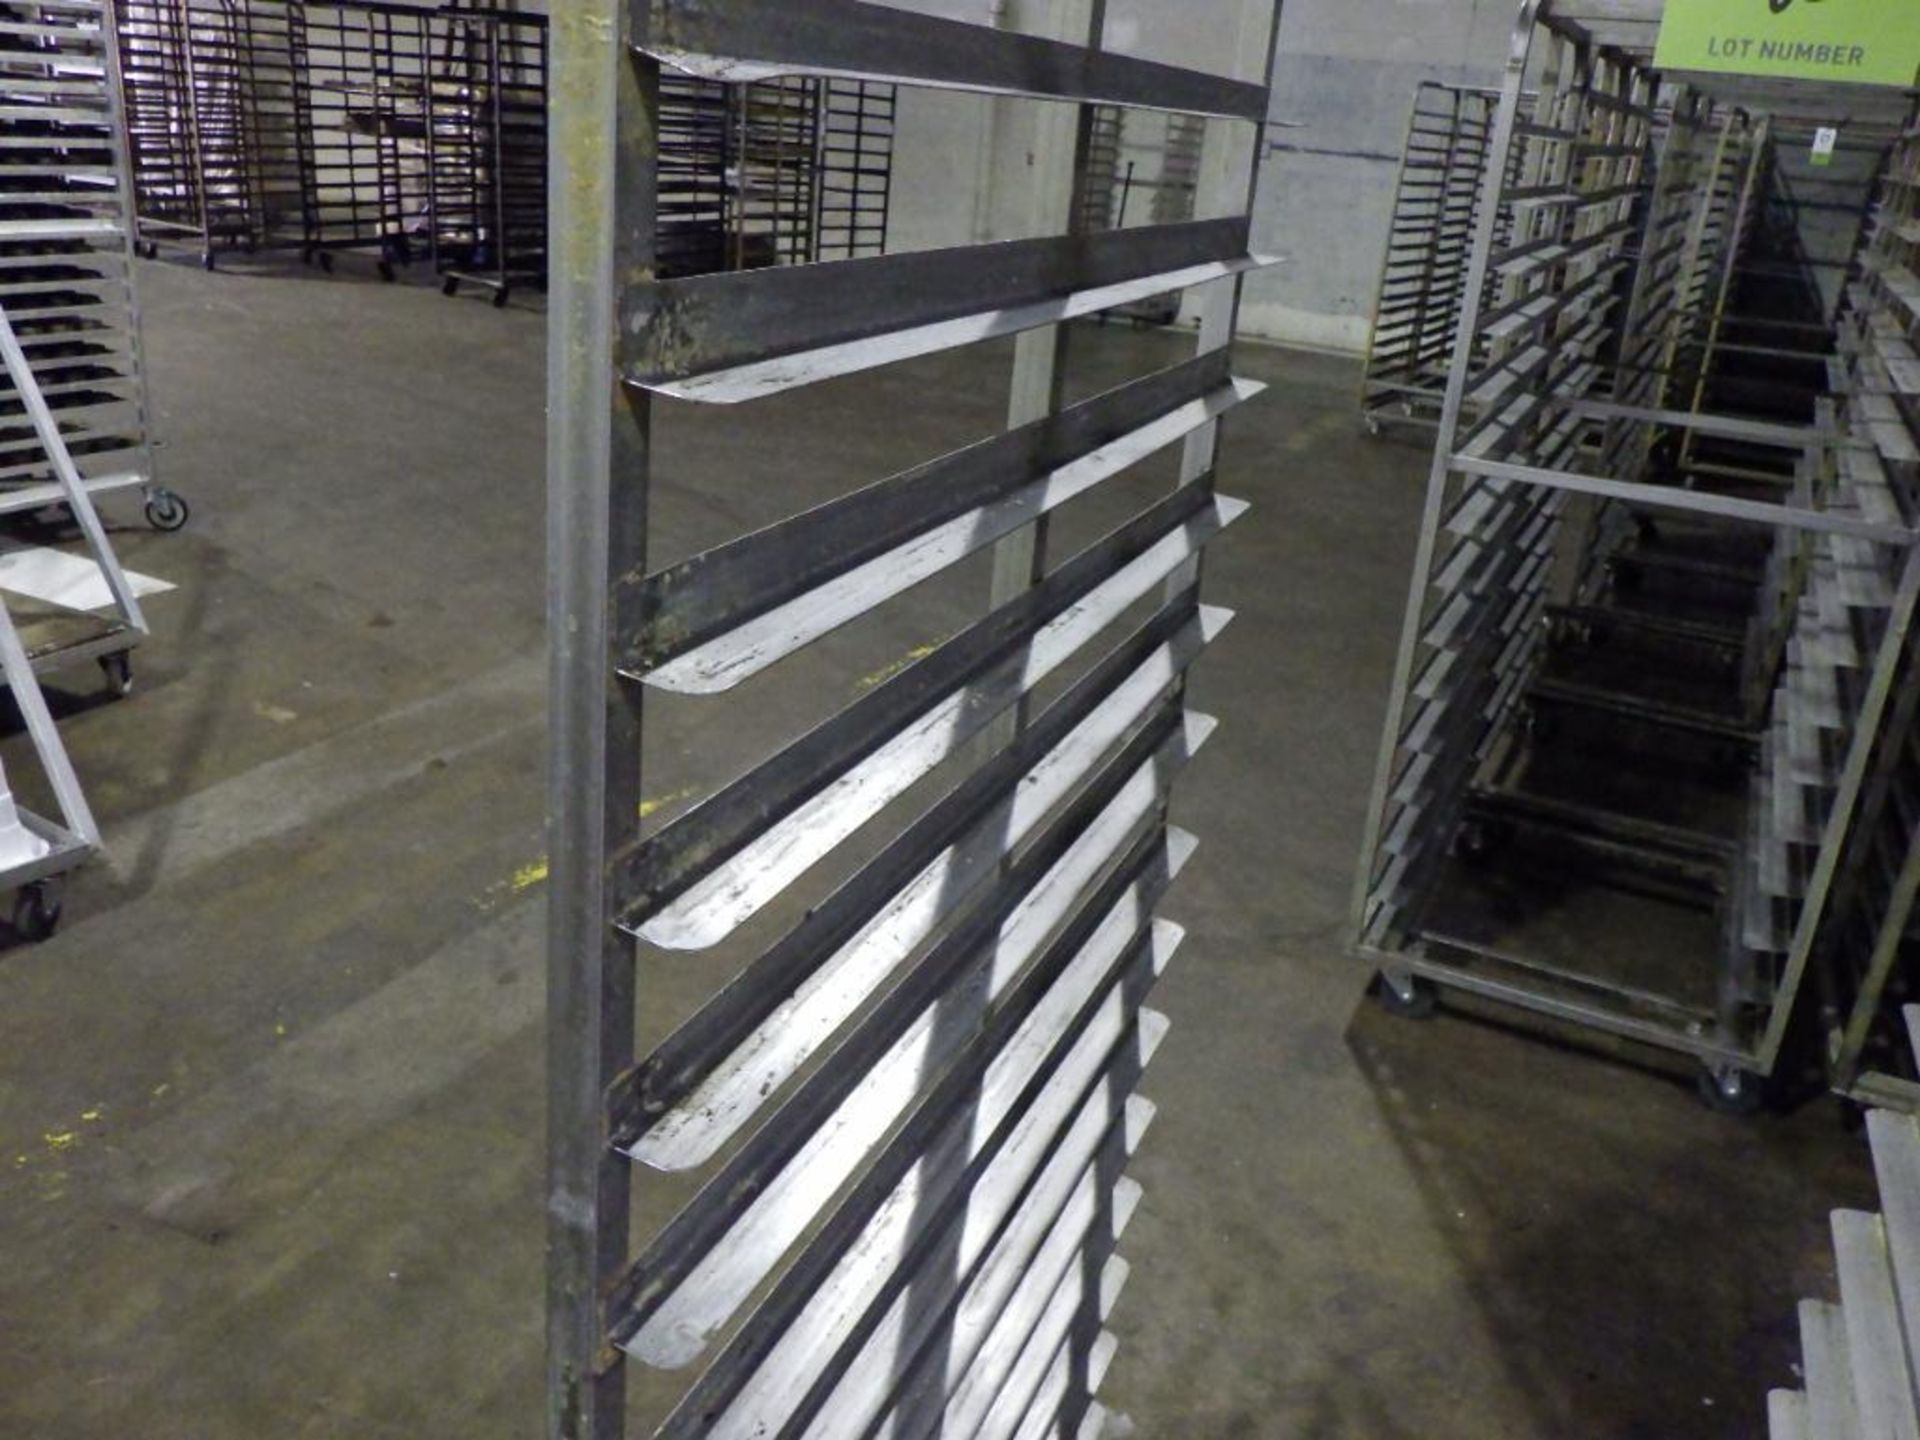 SS bakery rack - Image 6 of 10